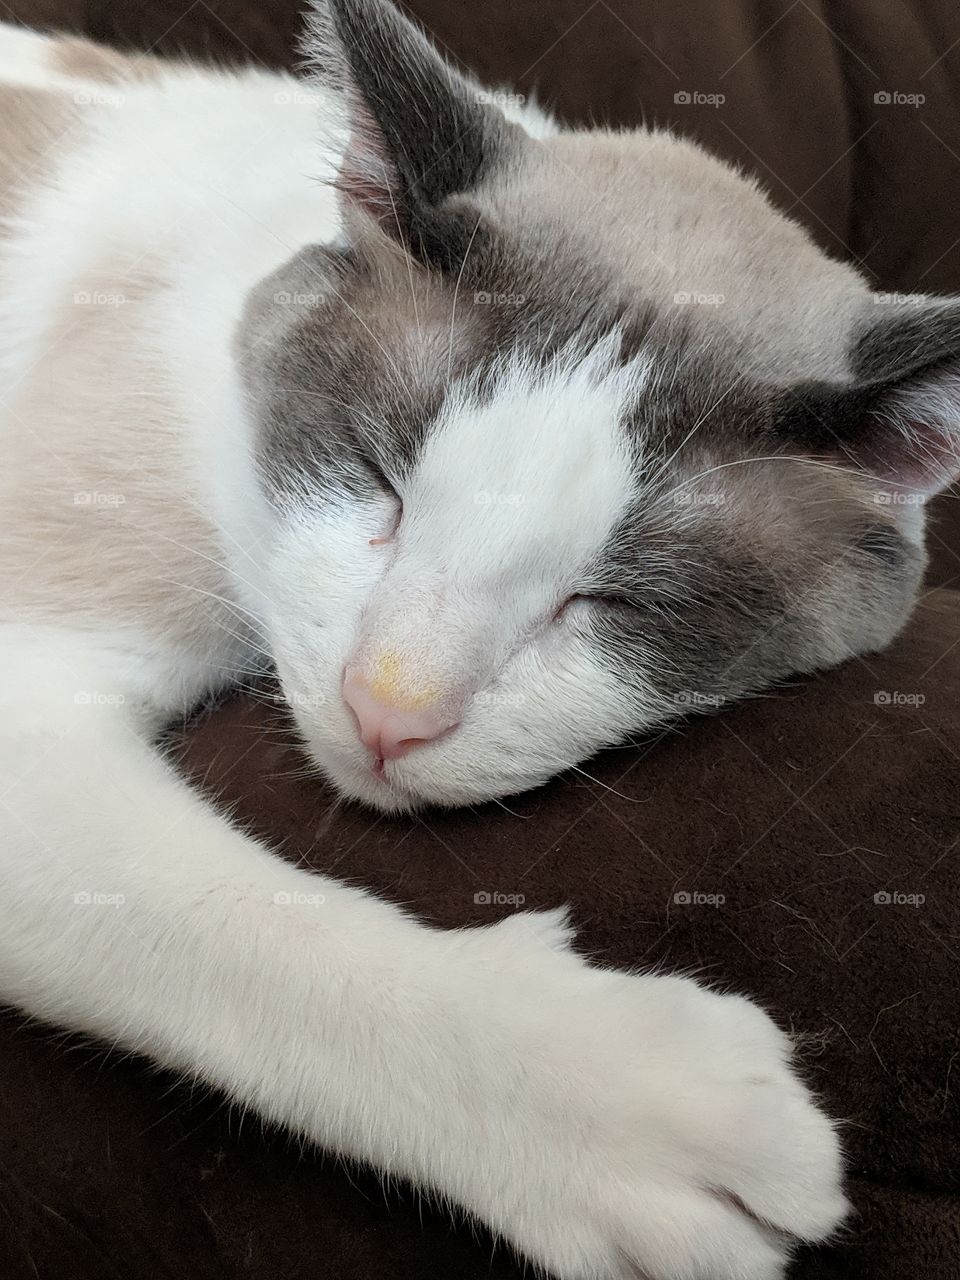 Sleepy kitten with a yellow nose